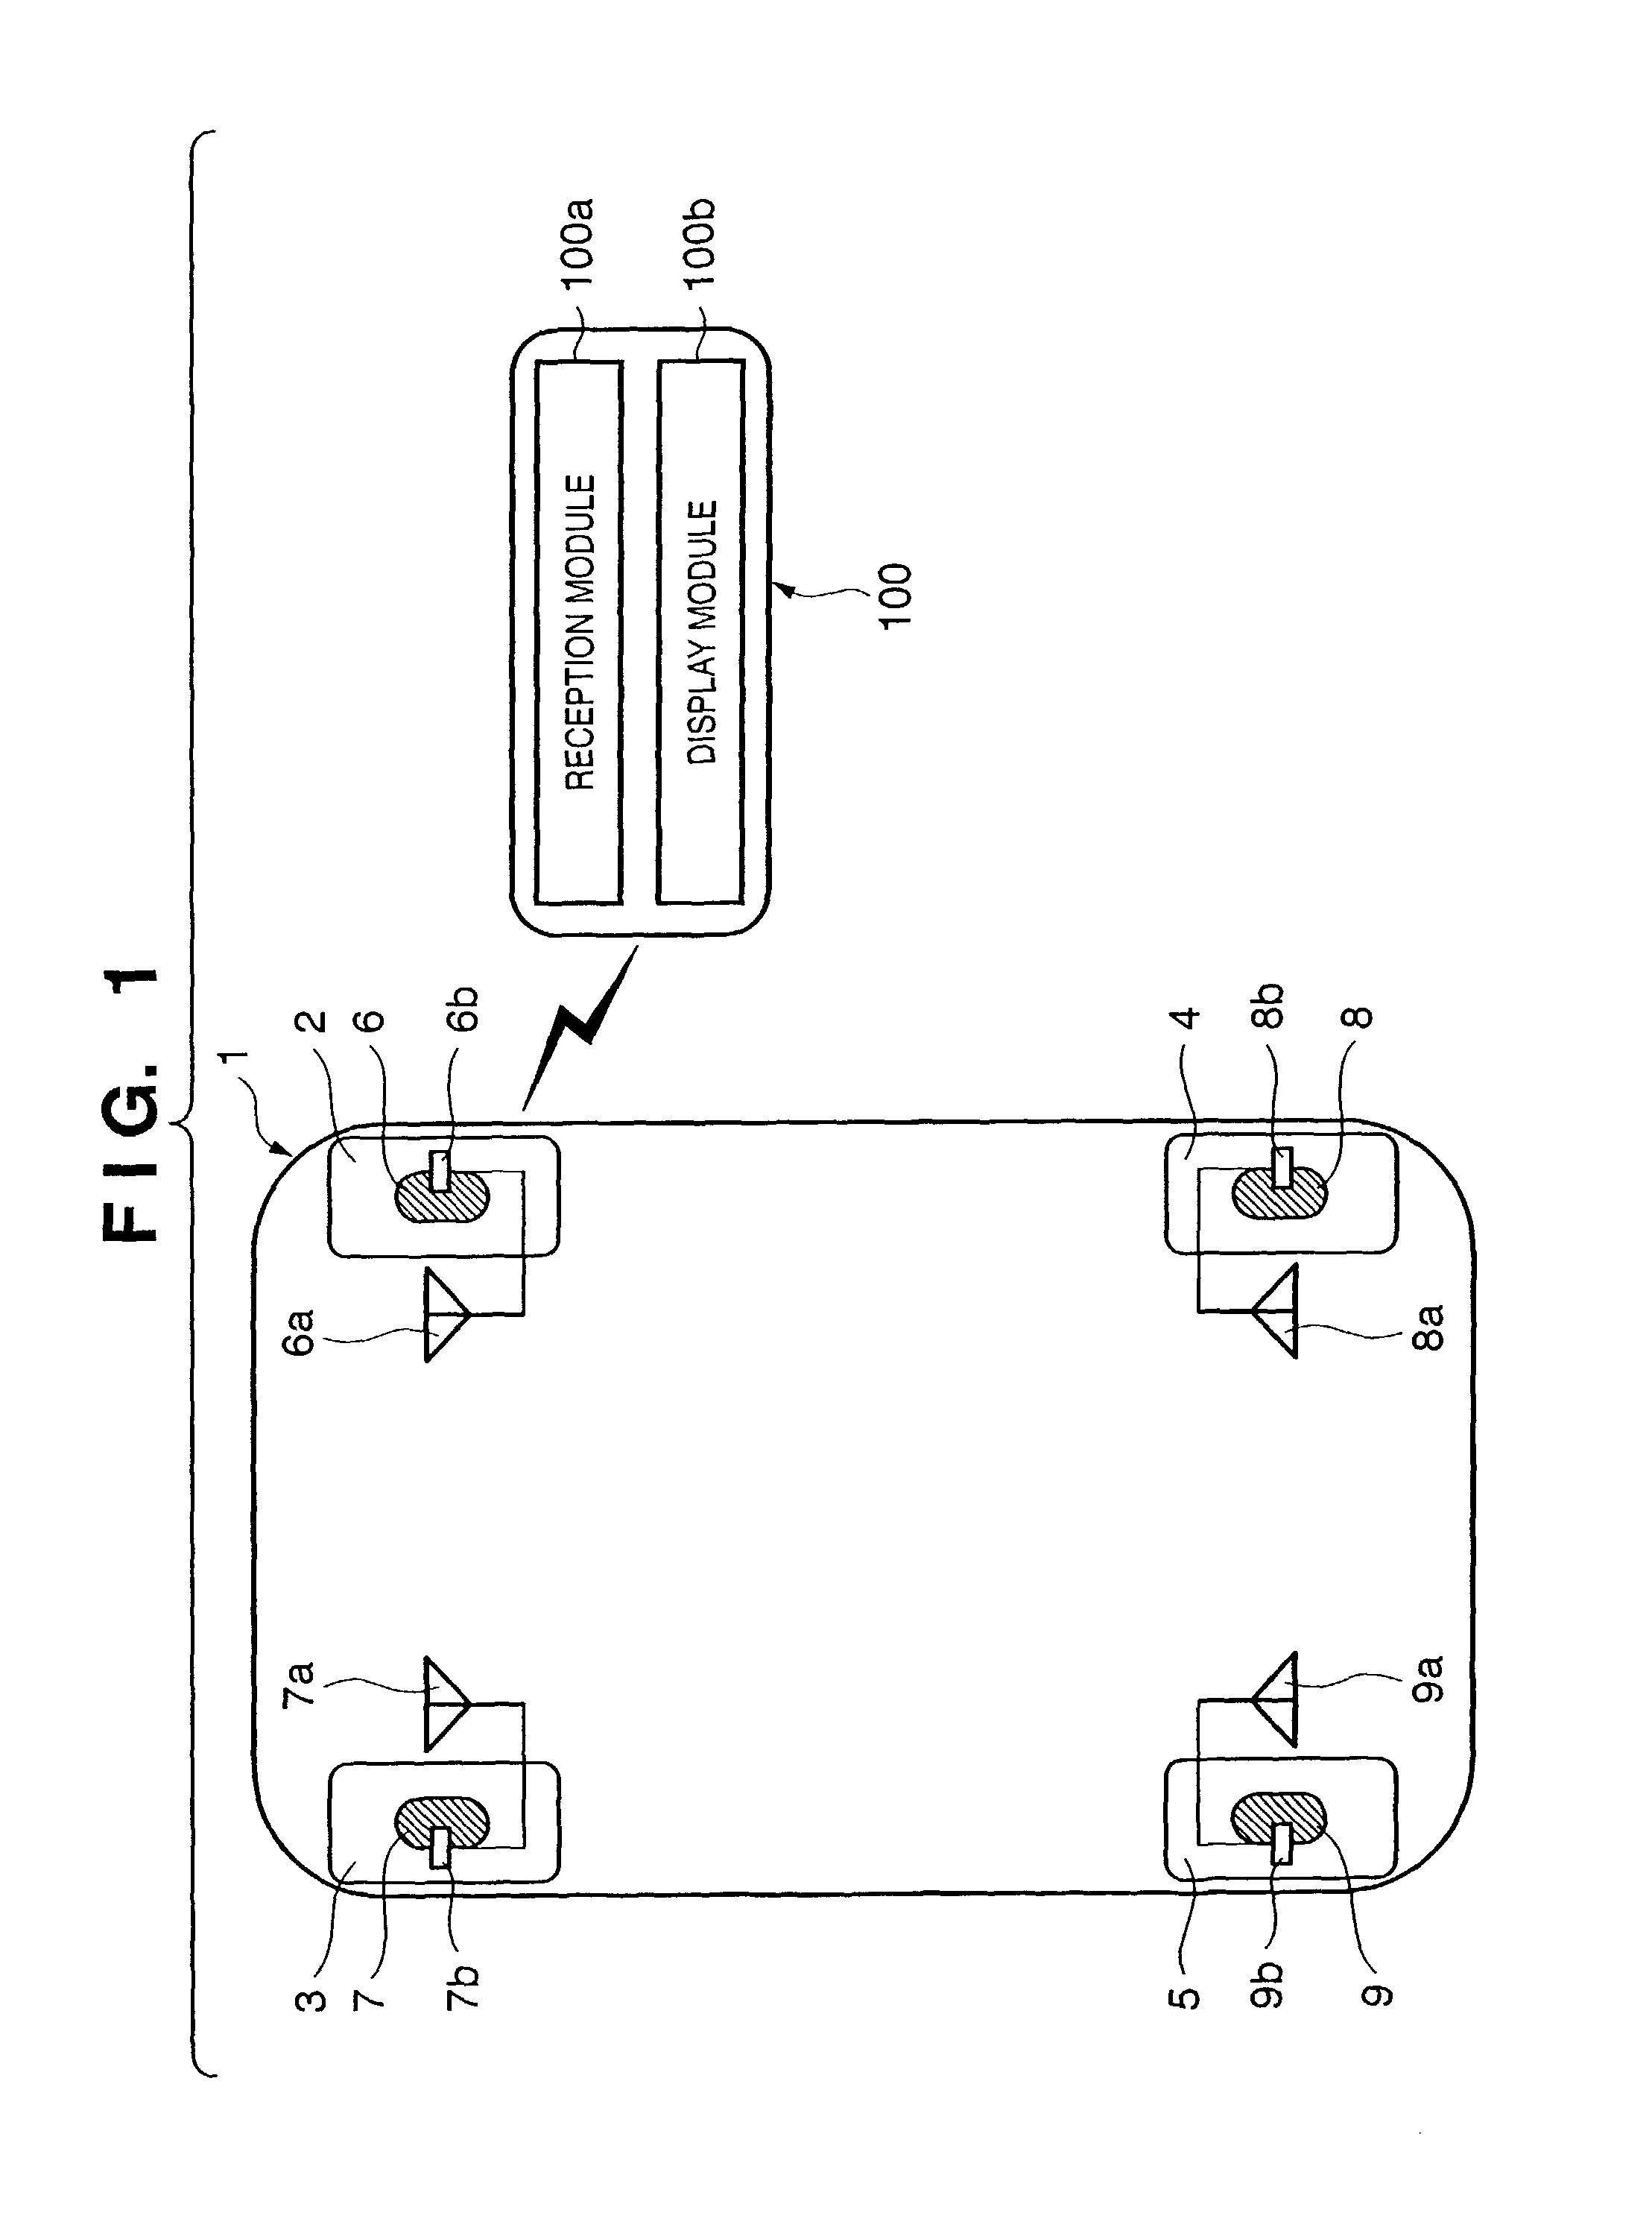 Air pressure information display system of vehicle tire